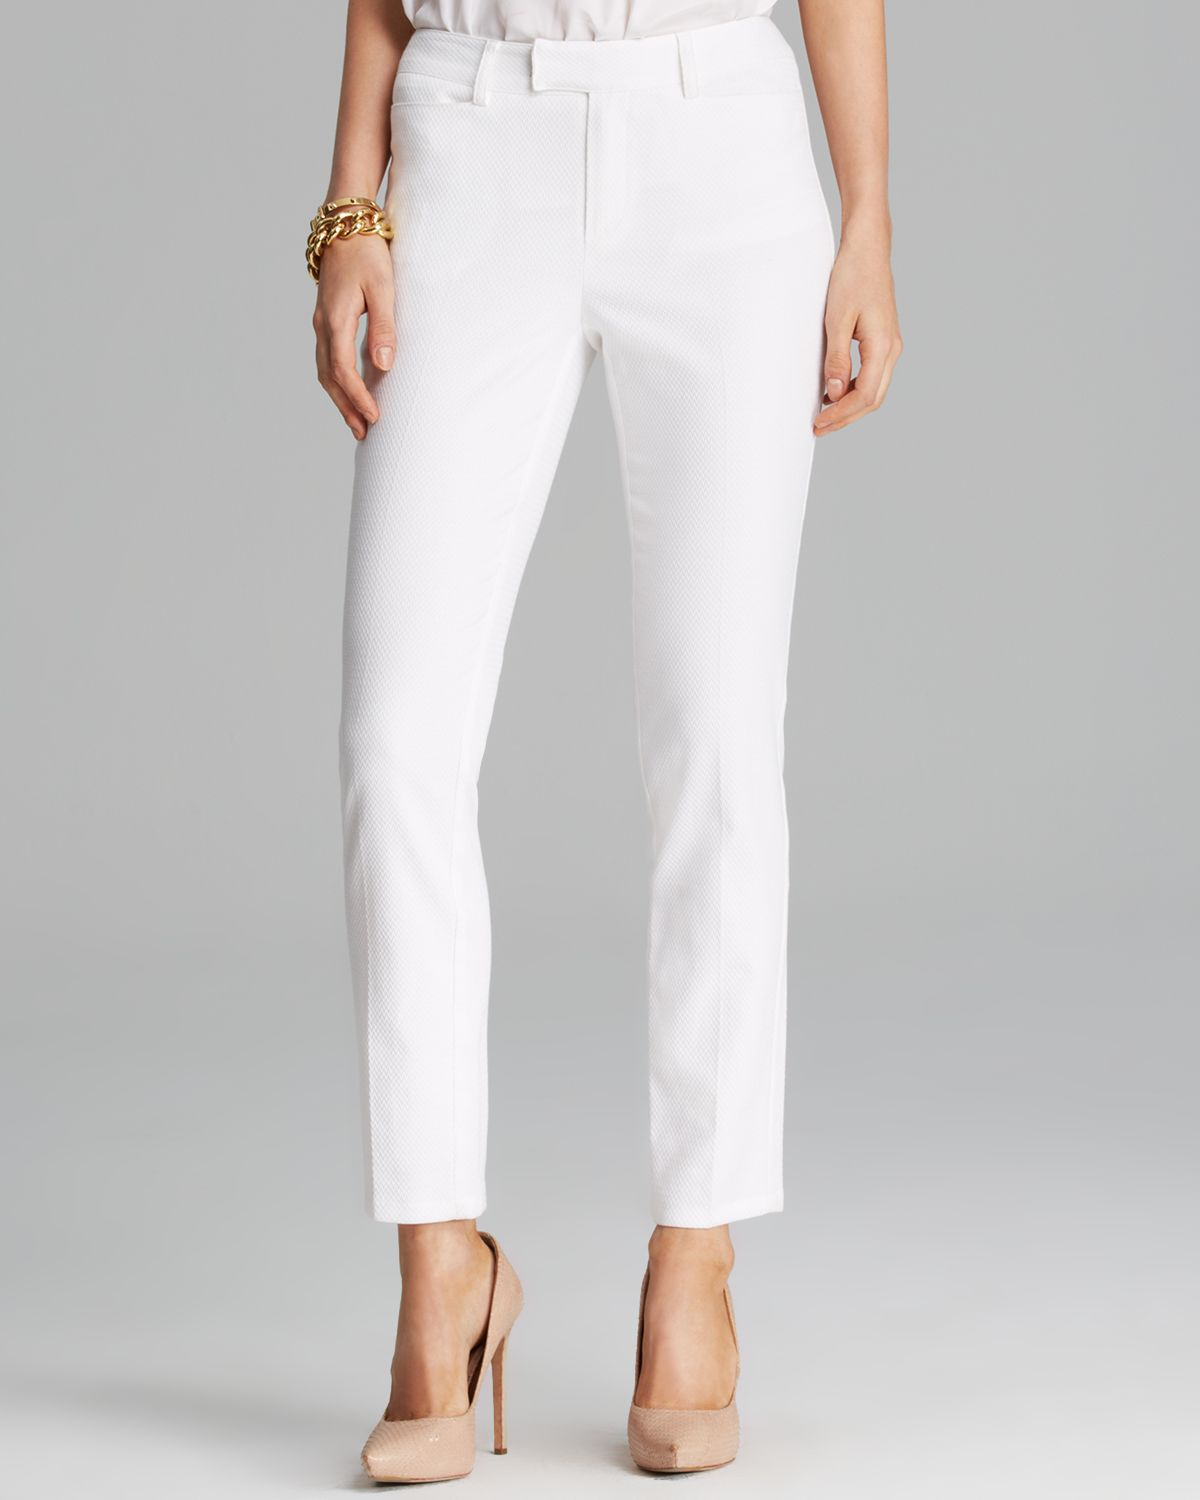 Lyst - Nanette Lepore Pants - Textured in White